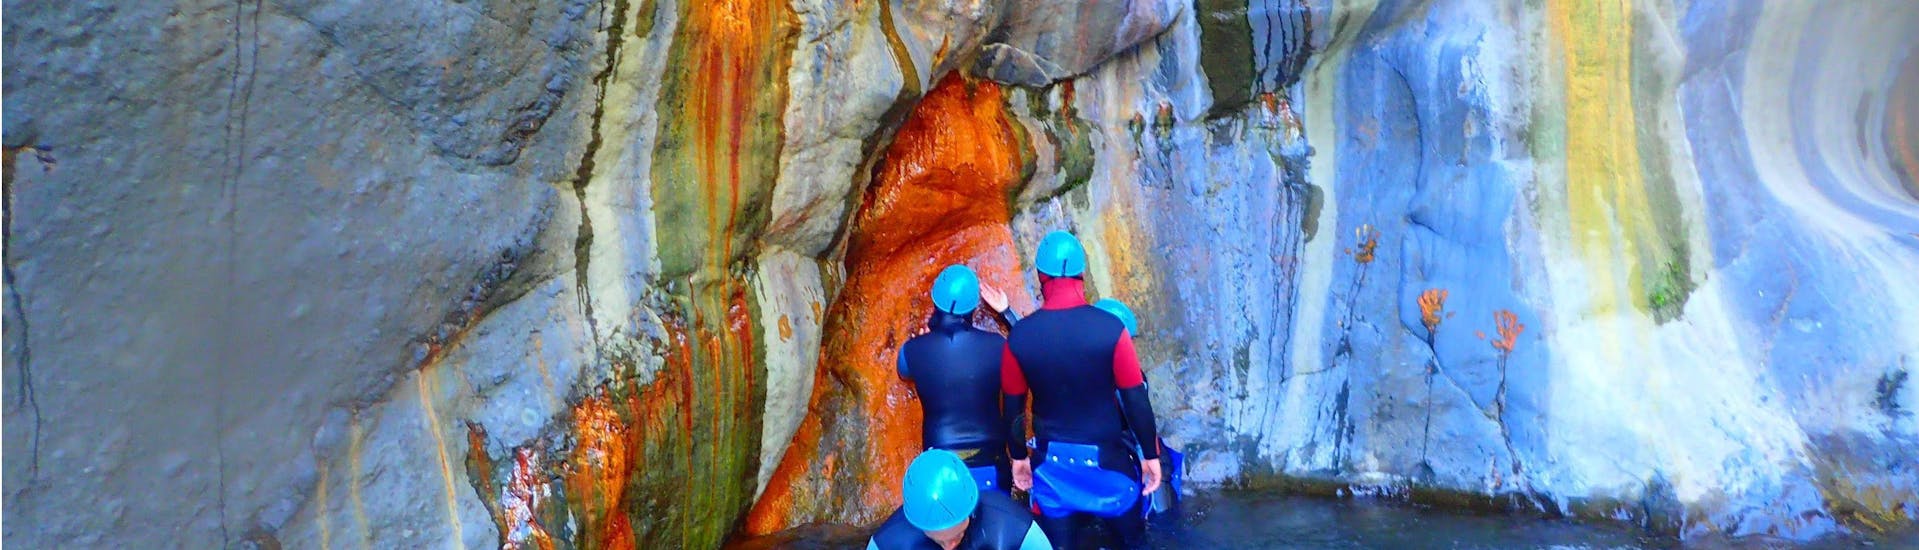 Gevorderde Canyoning in Cilaos - Canyon de Bras Rouge.